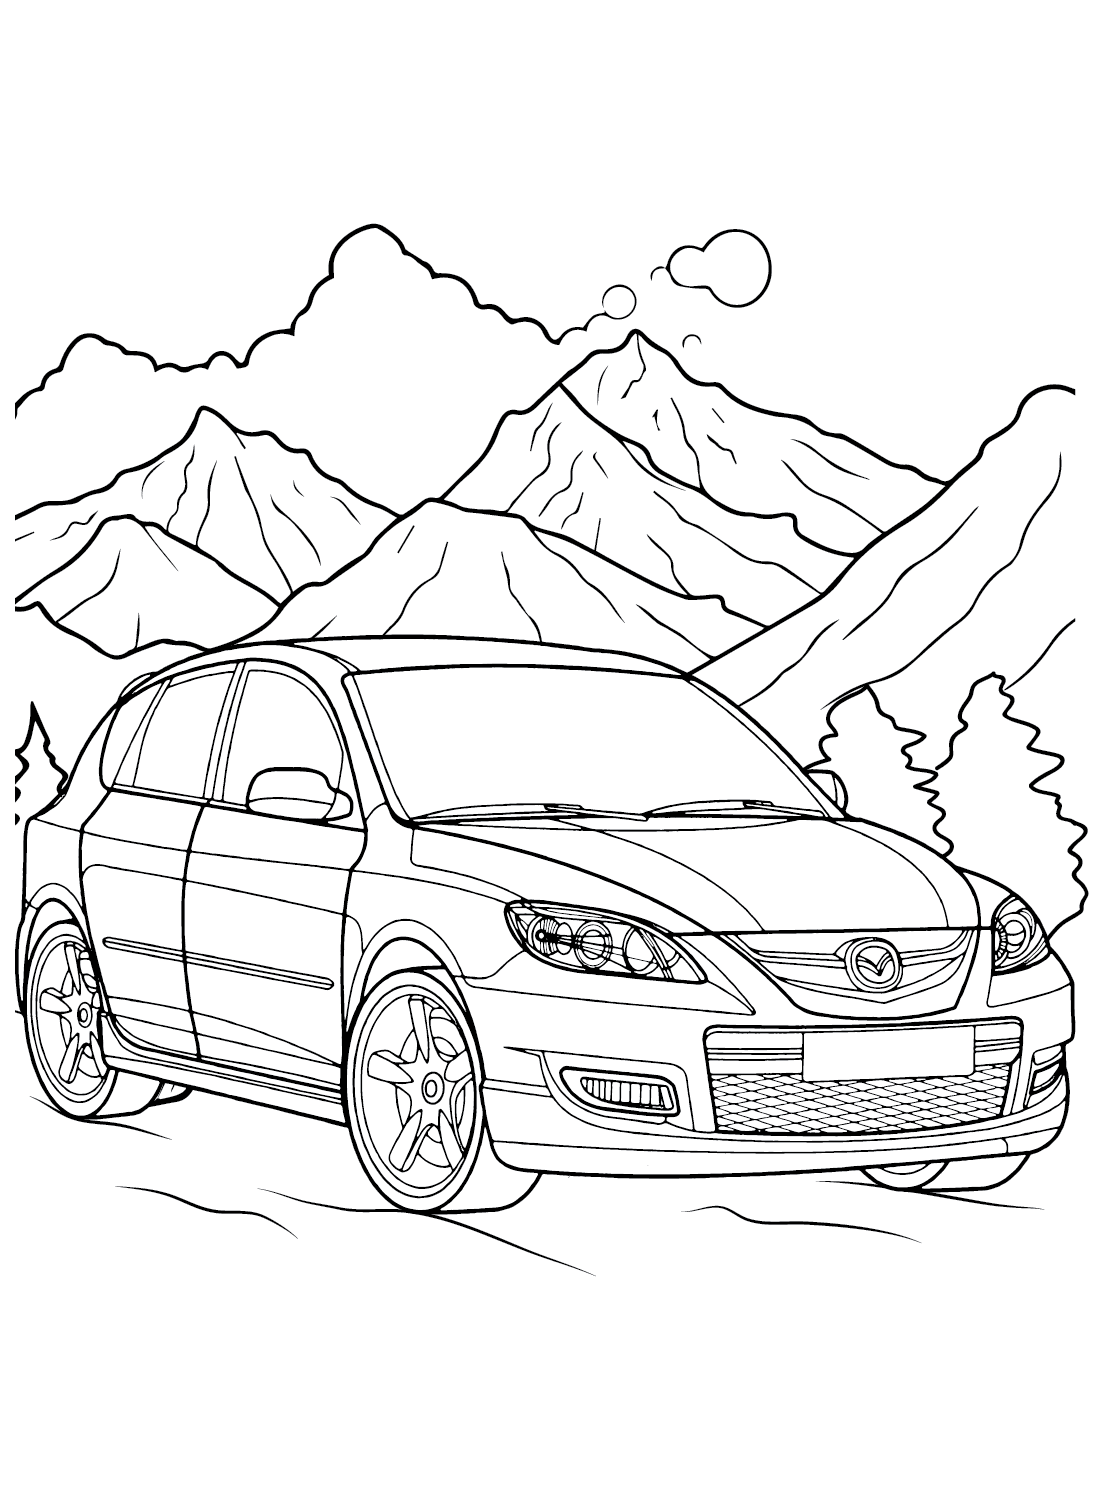 Mazda 3 MPS Coloring Page from Mazda